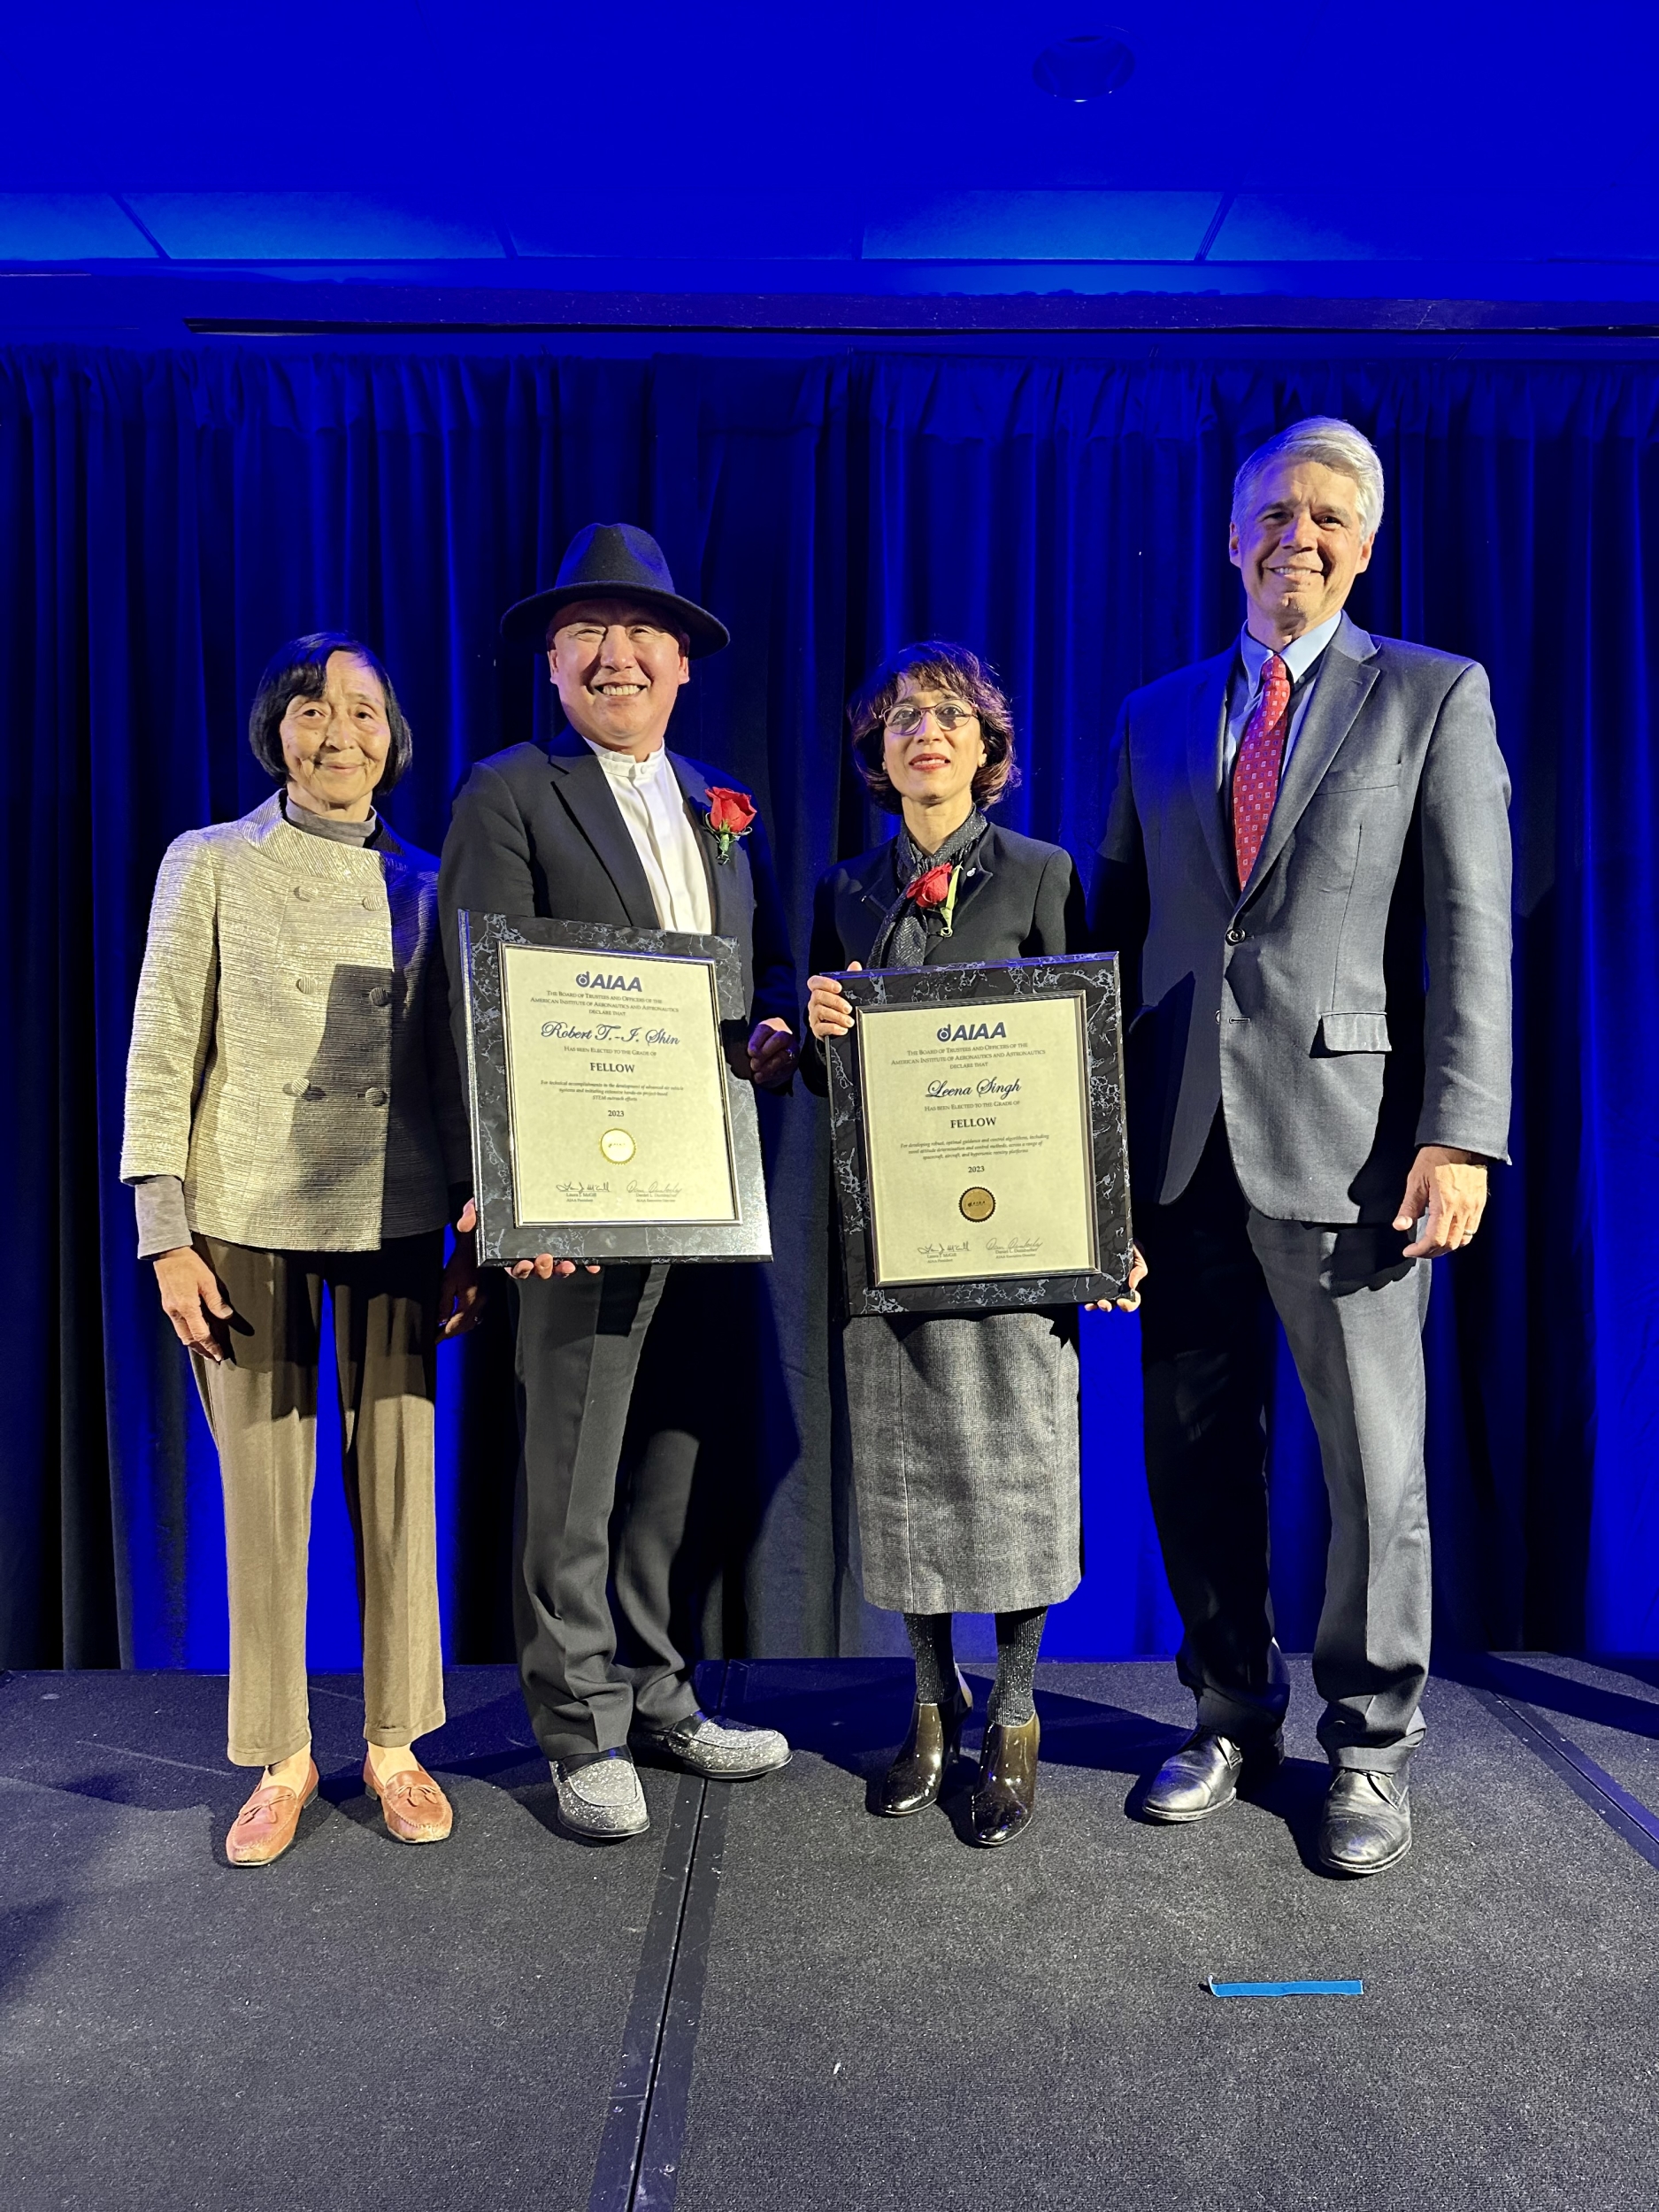 From left to right, Laboratory staff member Hsiao-hua Burke, Shin, Singh, and Laboratory director Eric Evans attend the AIAA induction ceremony.